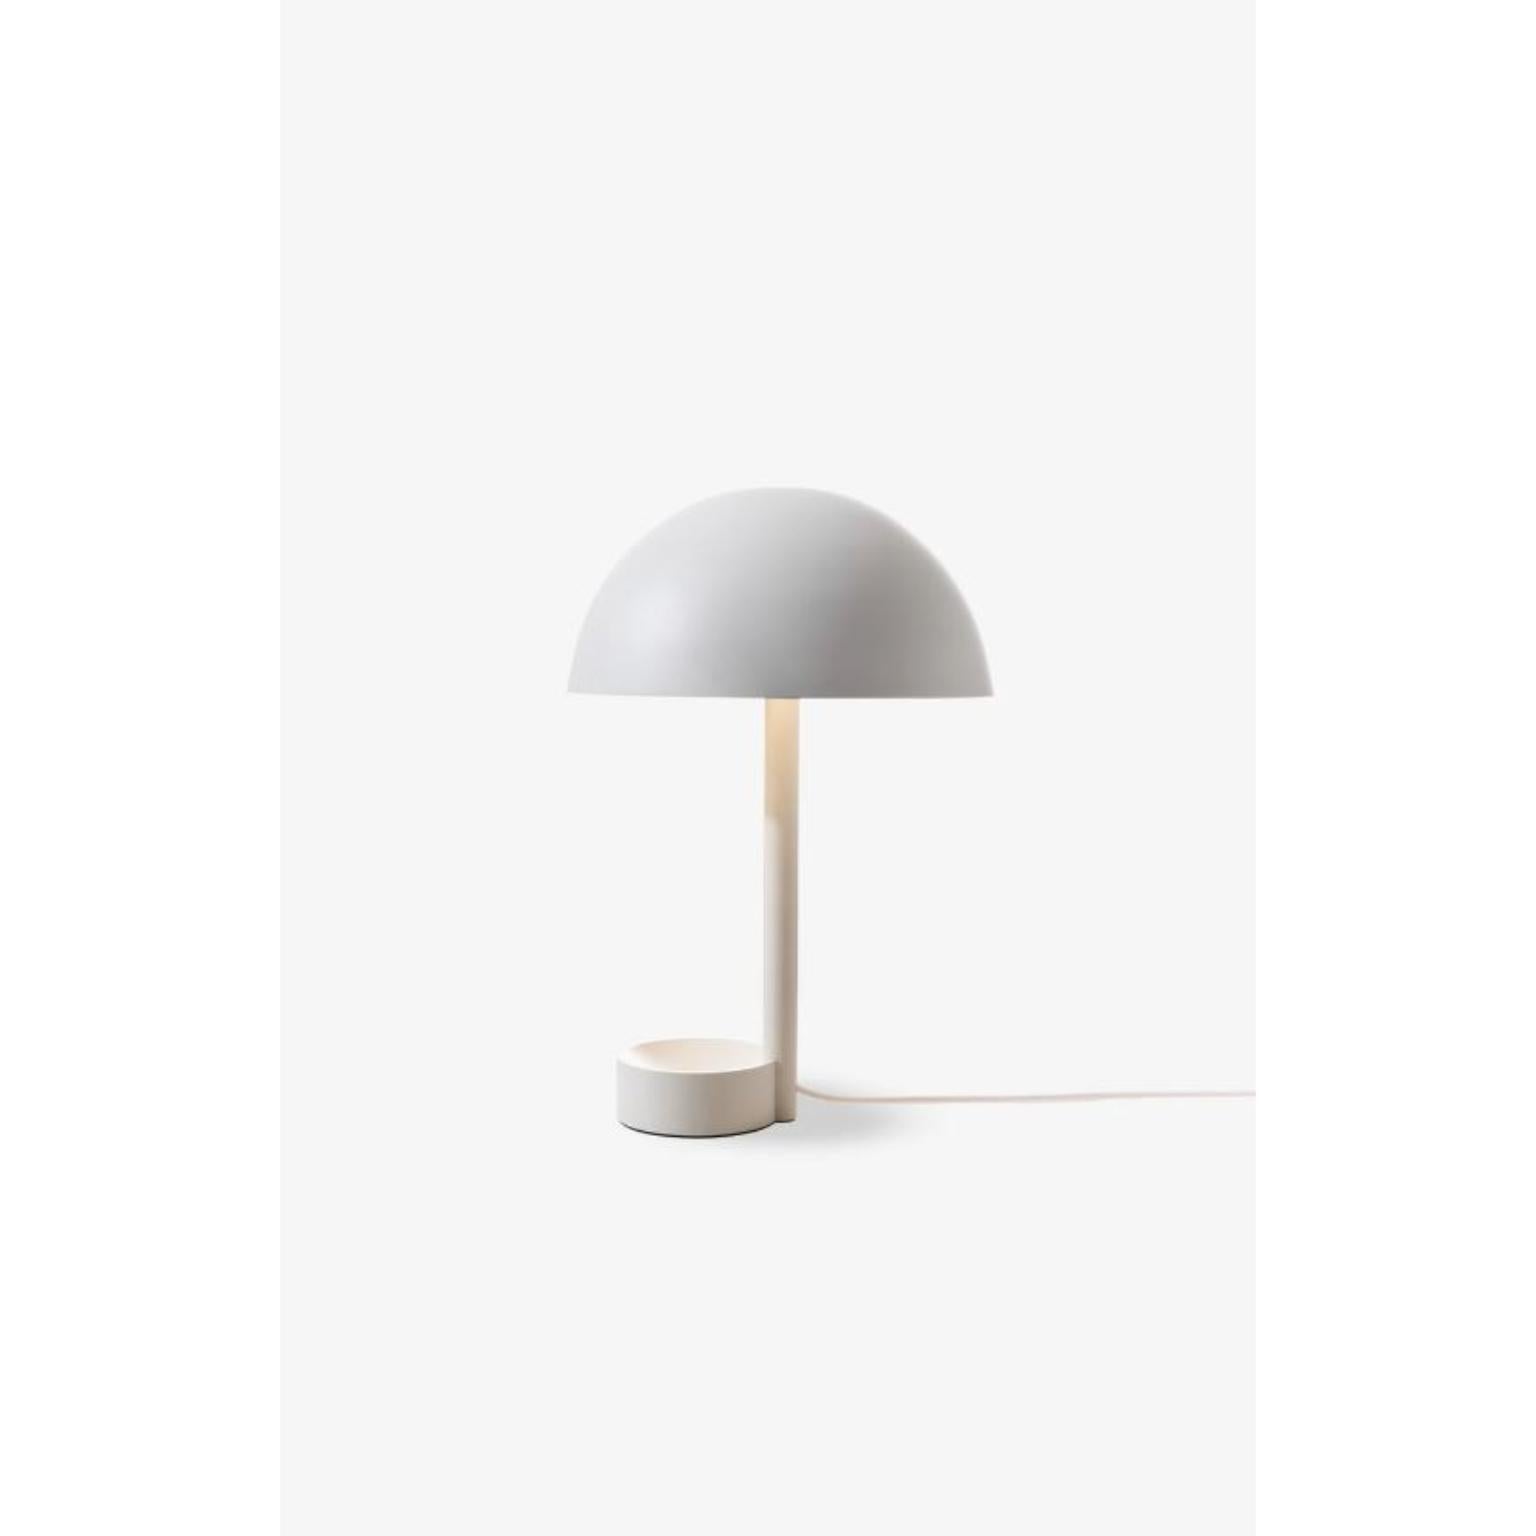 White Copa Table Lamp by Wentz
Dimensions: D 30 x W 30 x H 45 cm
Materials: Aluminum.


WEIGHT: 2,1kg / 4,6 lbs
Colors: Black, White, Sand, Leaf Green.
LIGHT SOURCE: 150lm. 2700K. 90 CRI.
DIMMING No. Consult-us for dimming systems.
VOLTAGE: